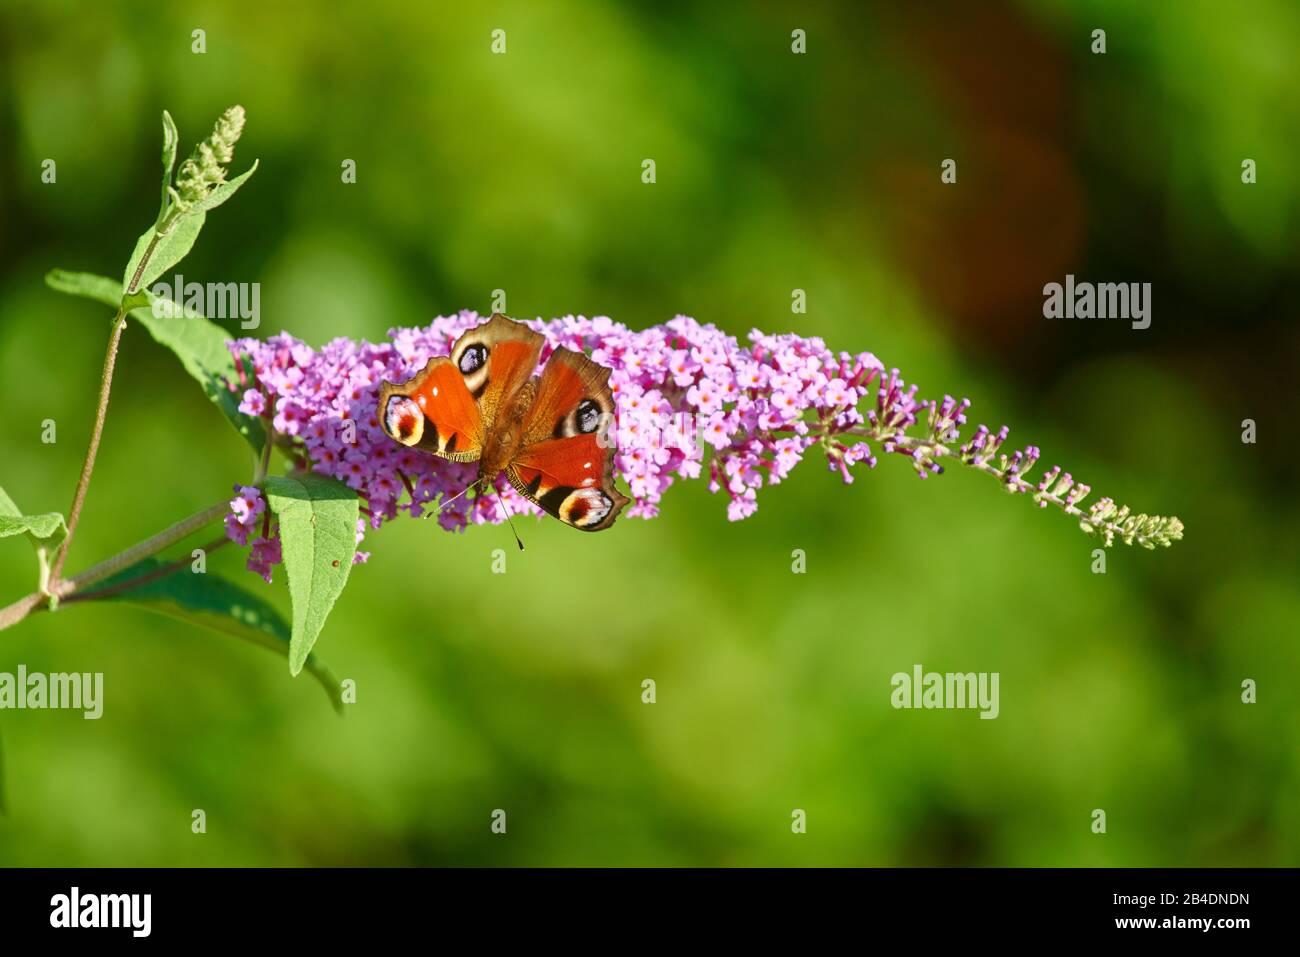 Peacock butterfly, Aglais io, butterfly shrub blossom, aerial view, Basque Country, Spain Stock Photo